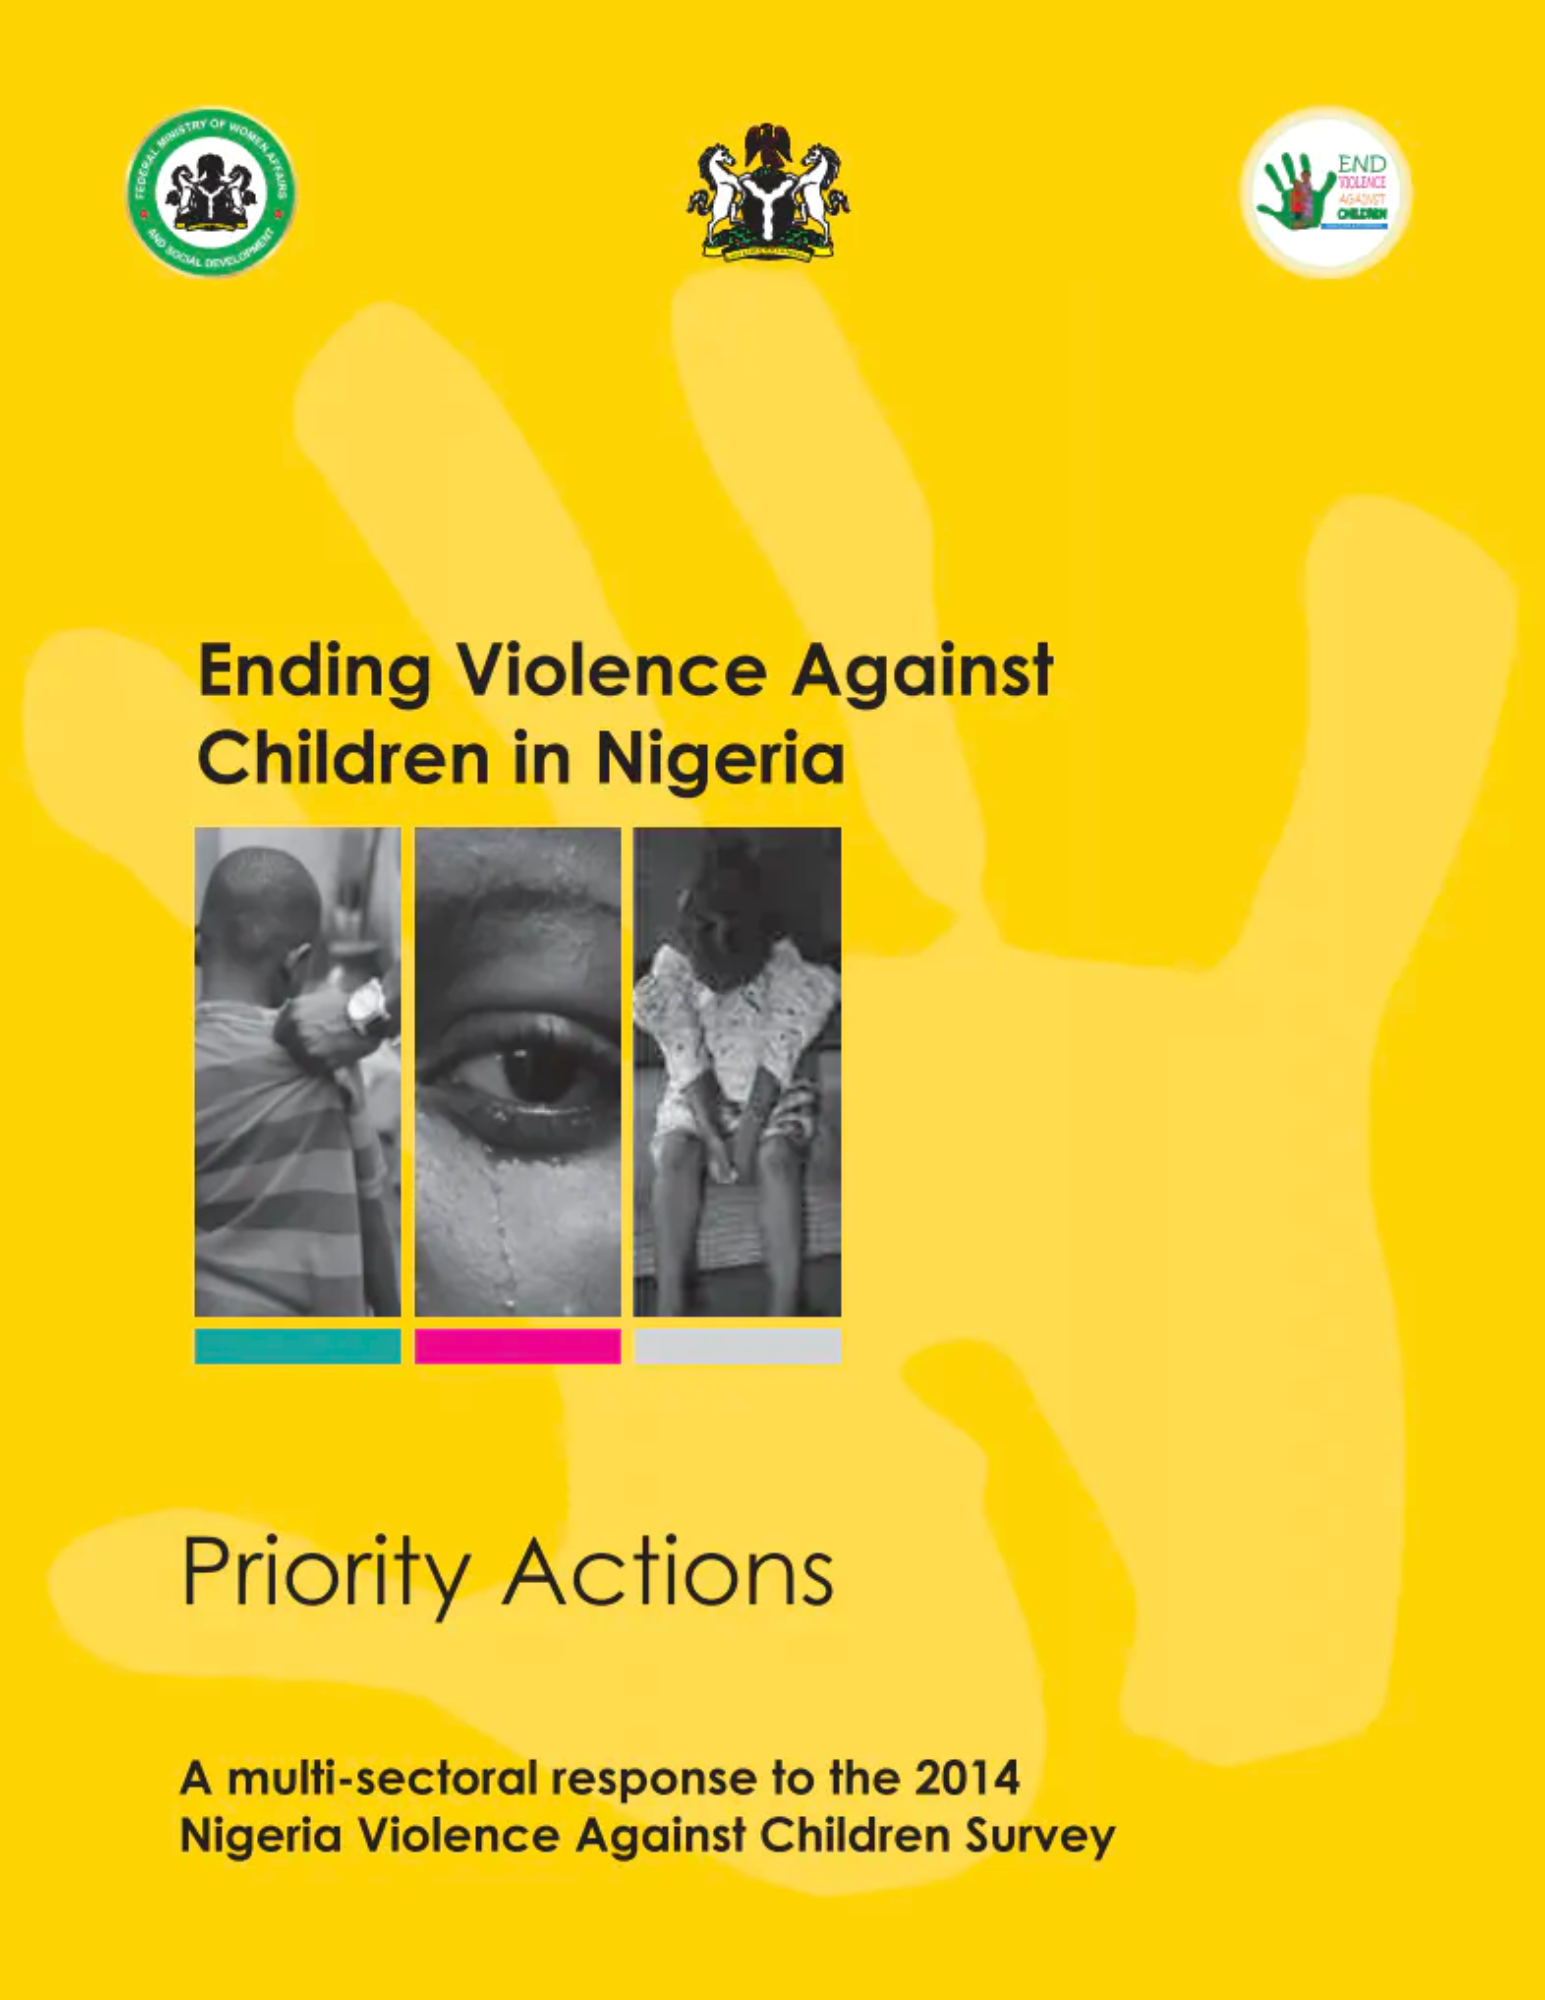 Nigeria priority actions to ending violence against children